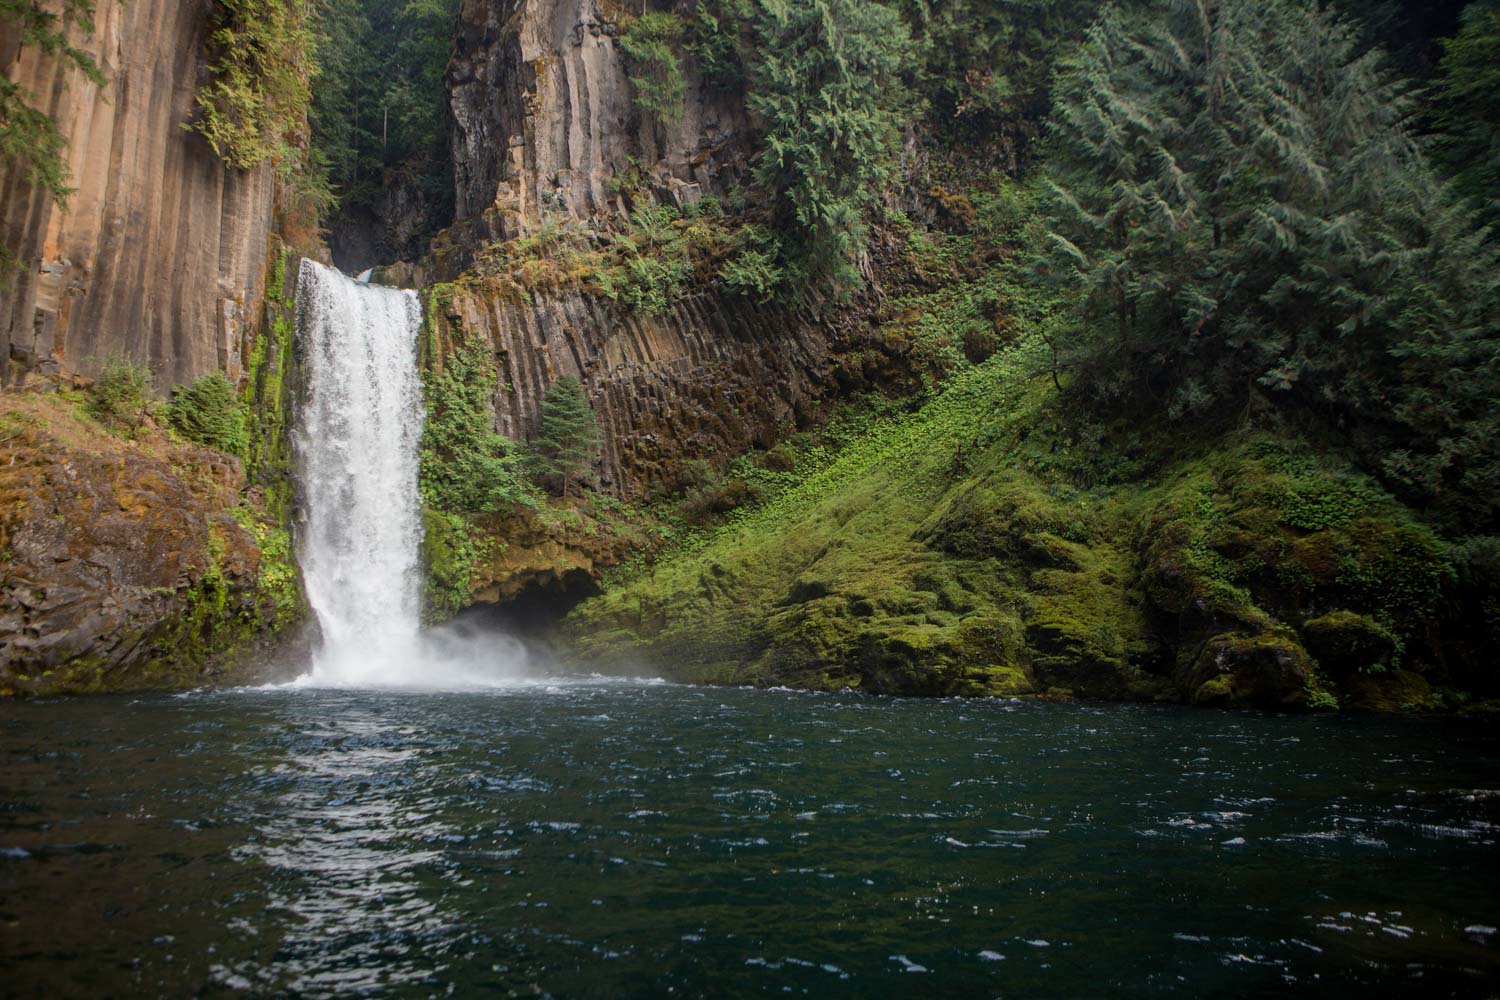 an oregon waterfall drops into a still pool from a steep rock face in a forest